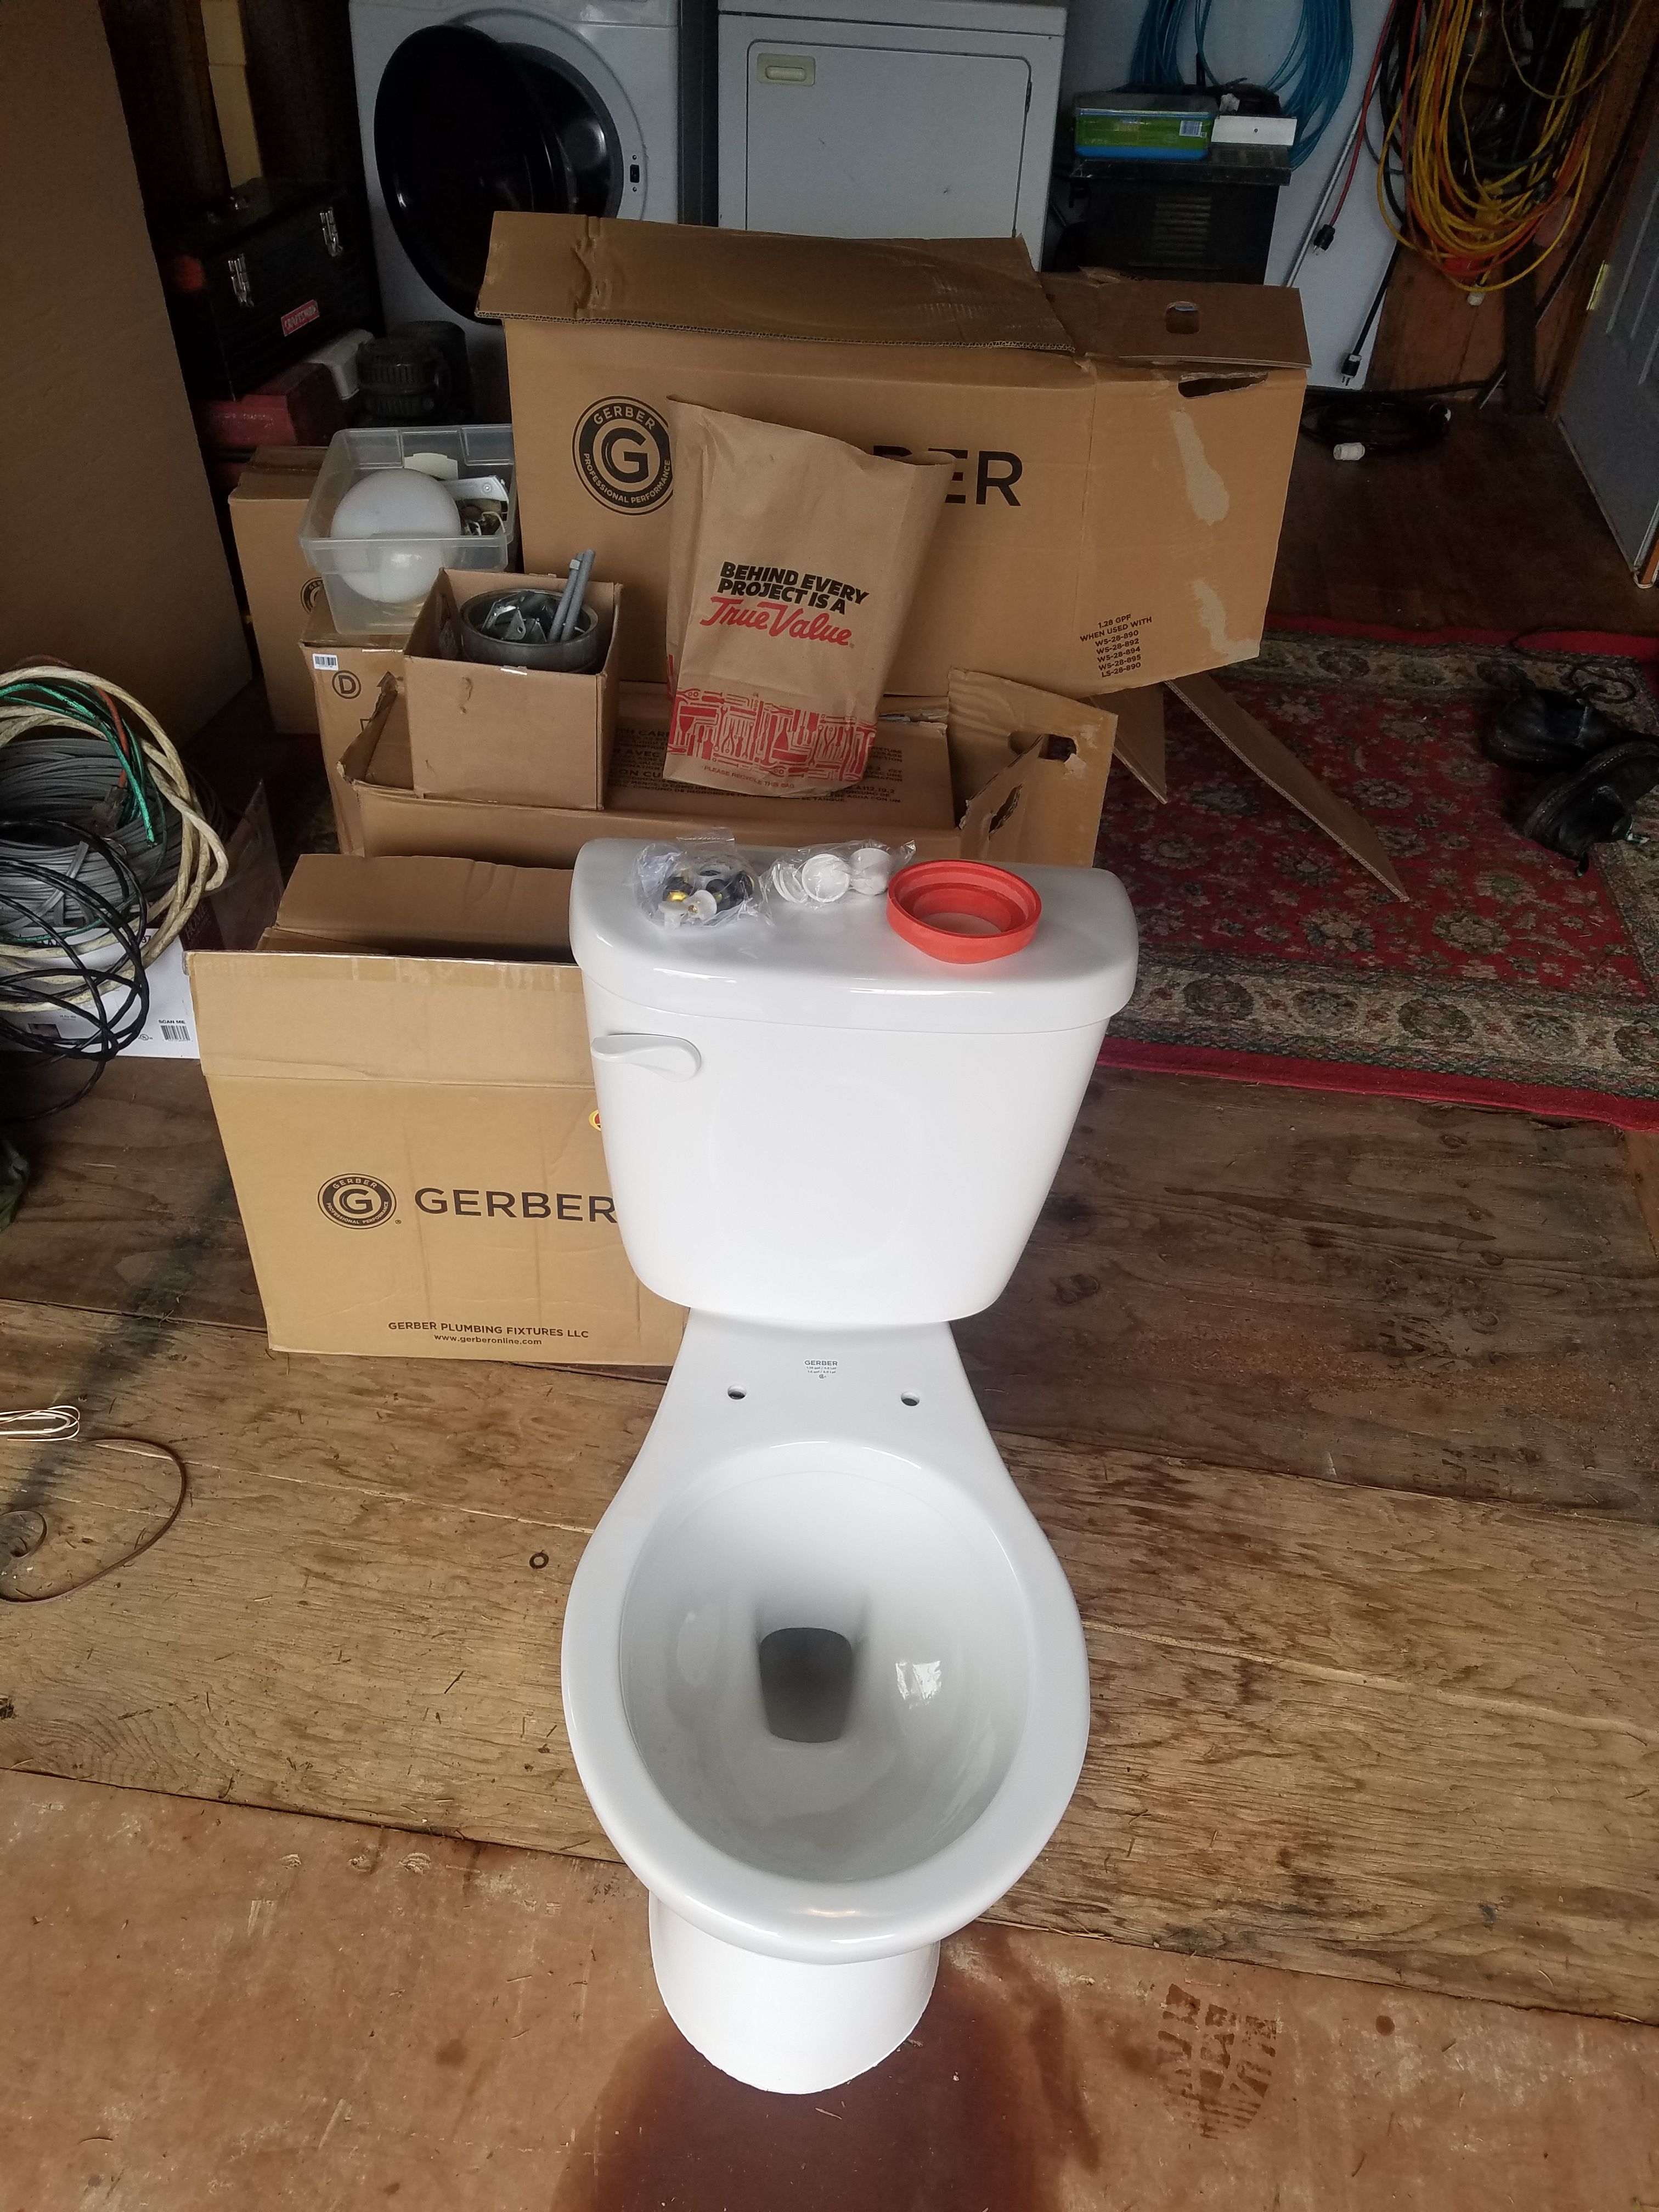 Gerber toilets with seats and other toilet seats